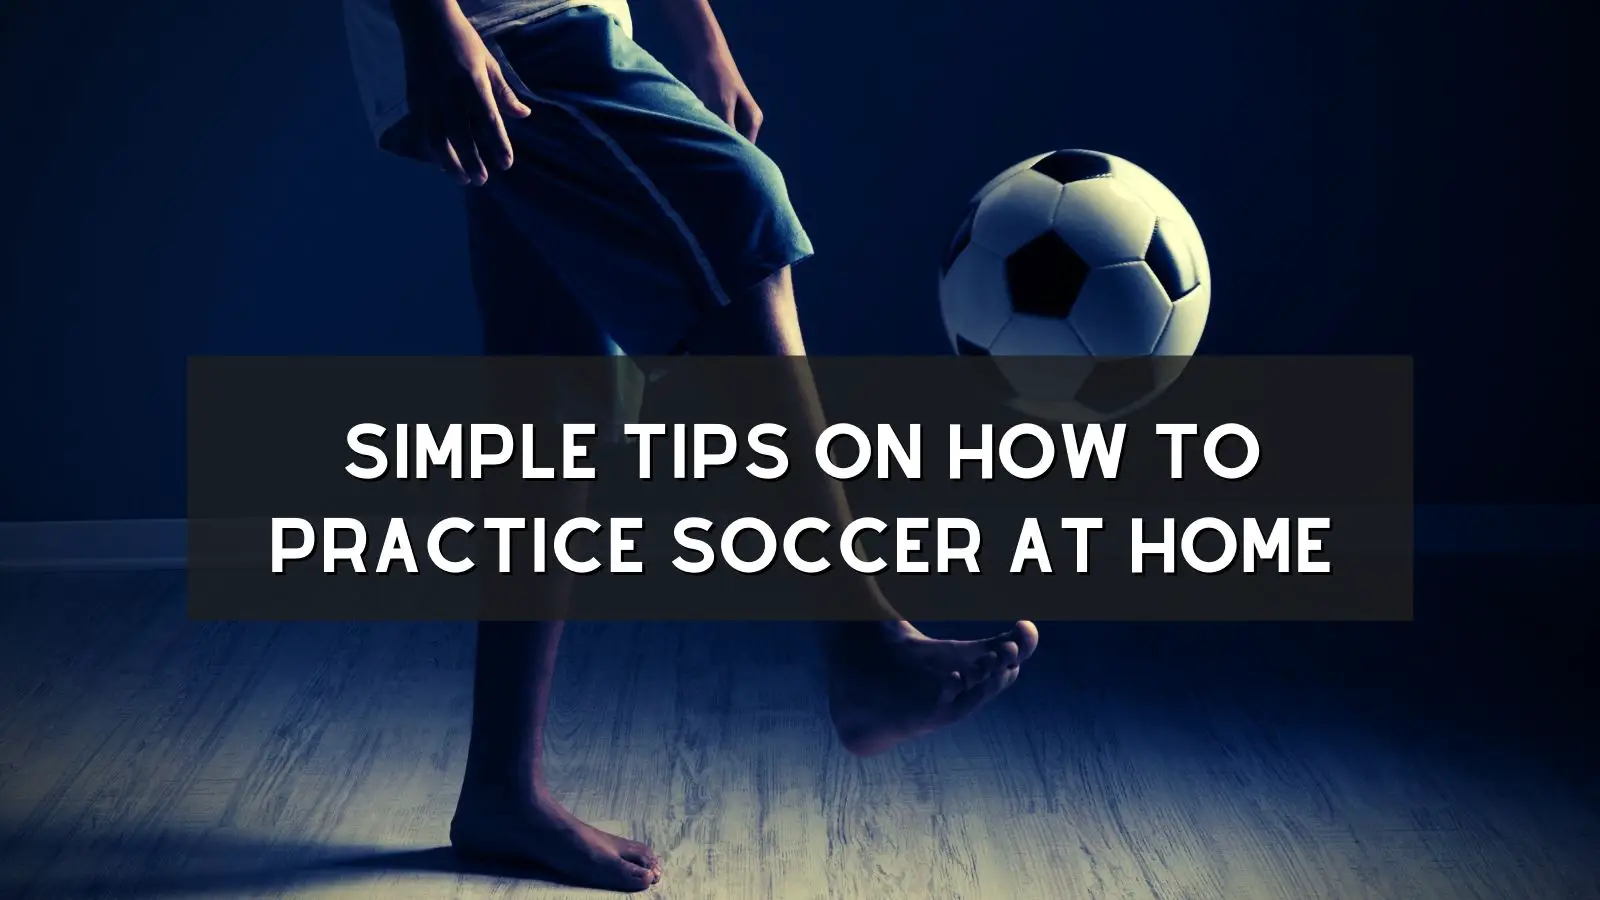 Simple Tips on How to Practice Soccer at Home